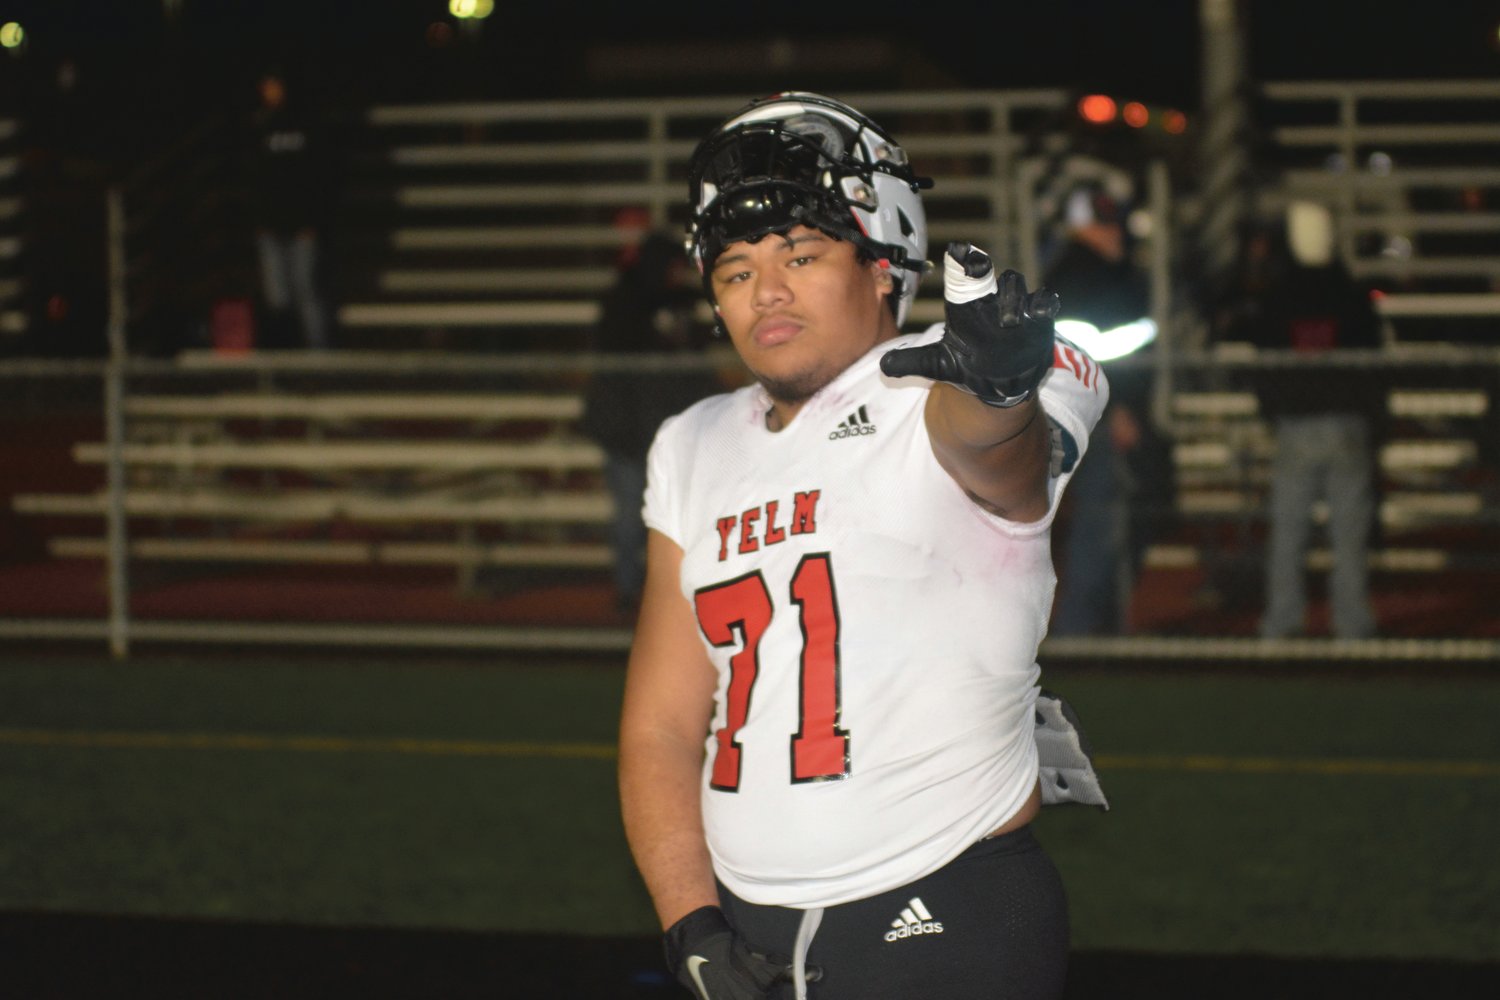 Senior right tackle Ami Fakava poses for a photo after Yelm defeated Gig Harbor 50-14 on Thursday, Oct. 27.